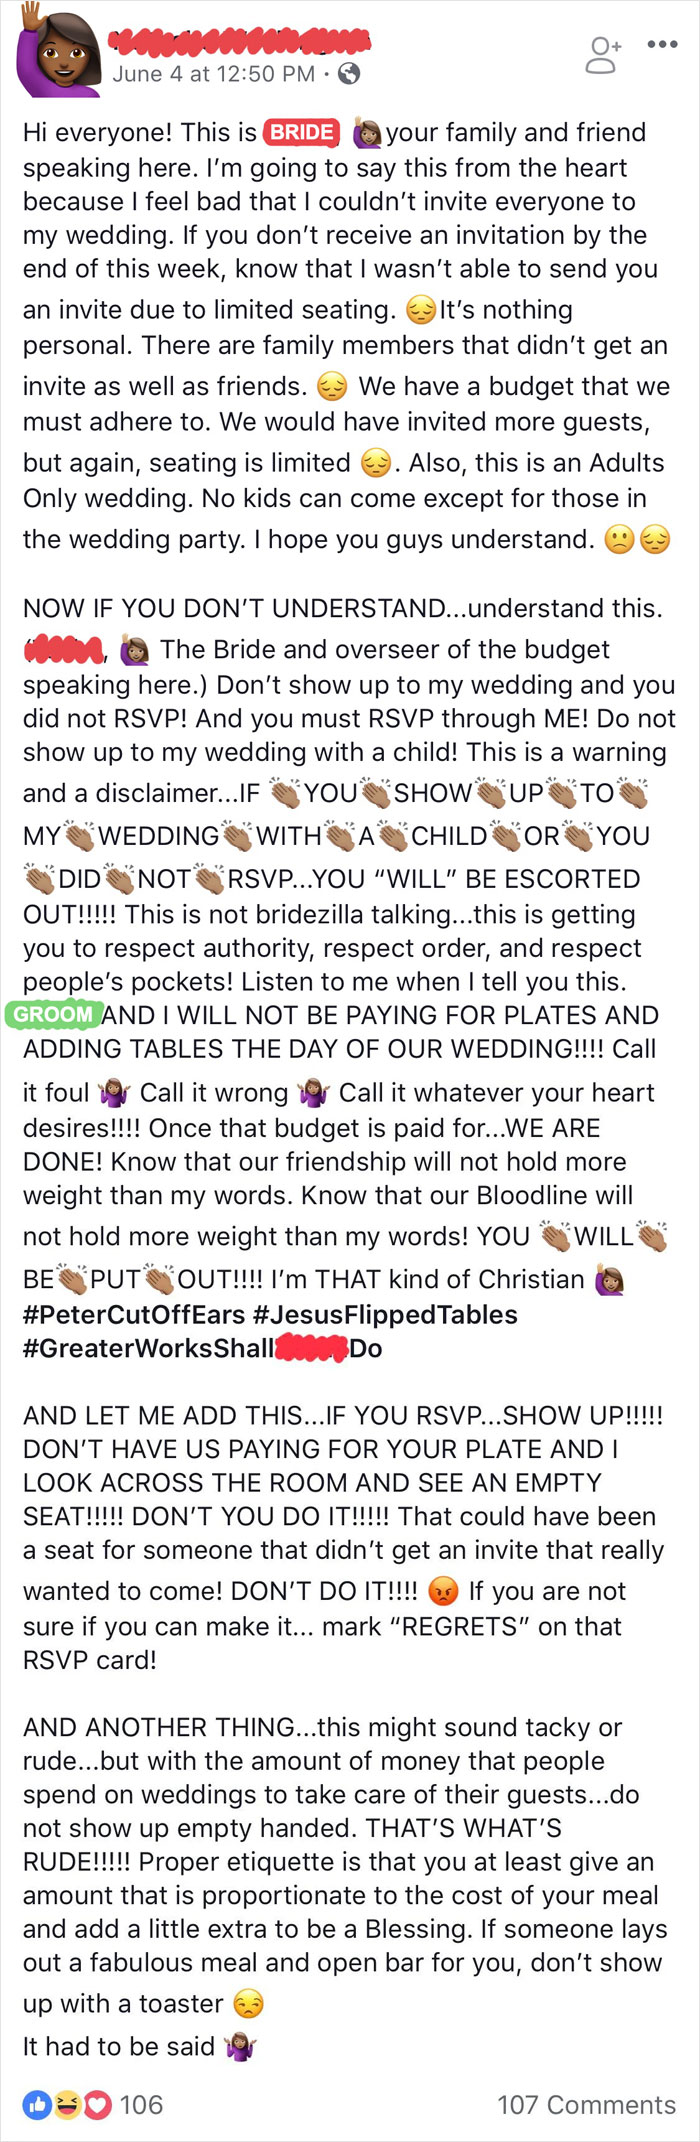 A Former Coworker Of Mine. She Was Always Extra At Work. It's No Surprise She Posted This Before Her Wedding. I'm Glad I Wasn't Invited